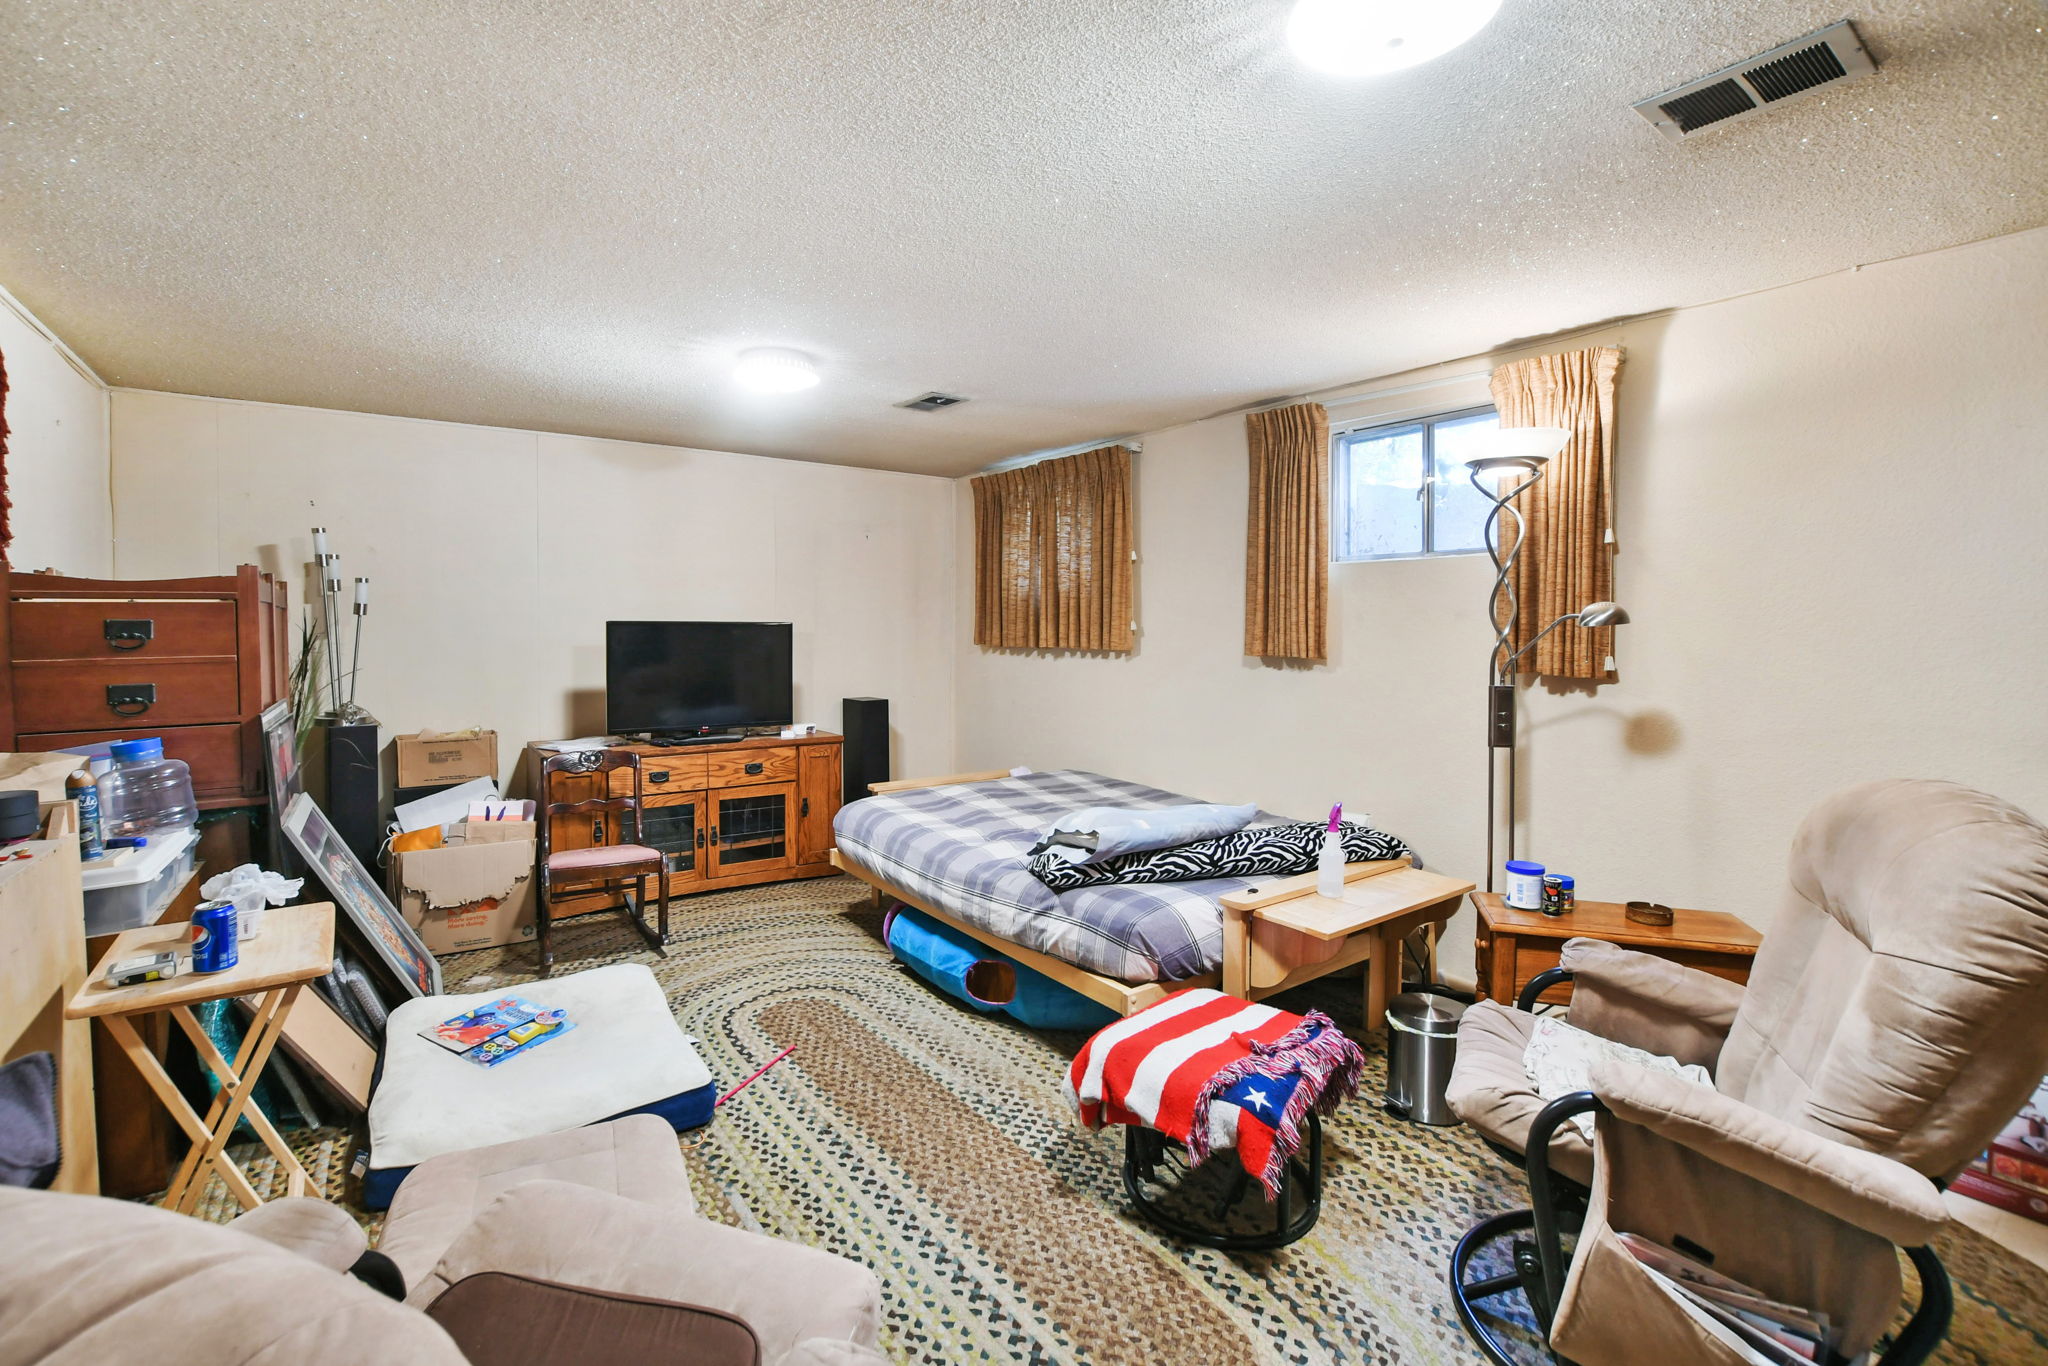  8830 Rutgers St, Westminster, CO 80031, US Photo 17